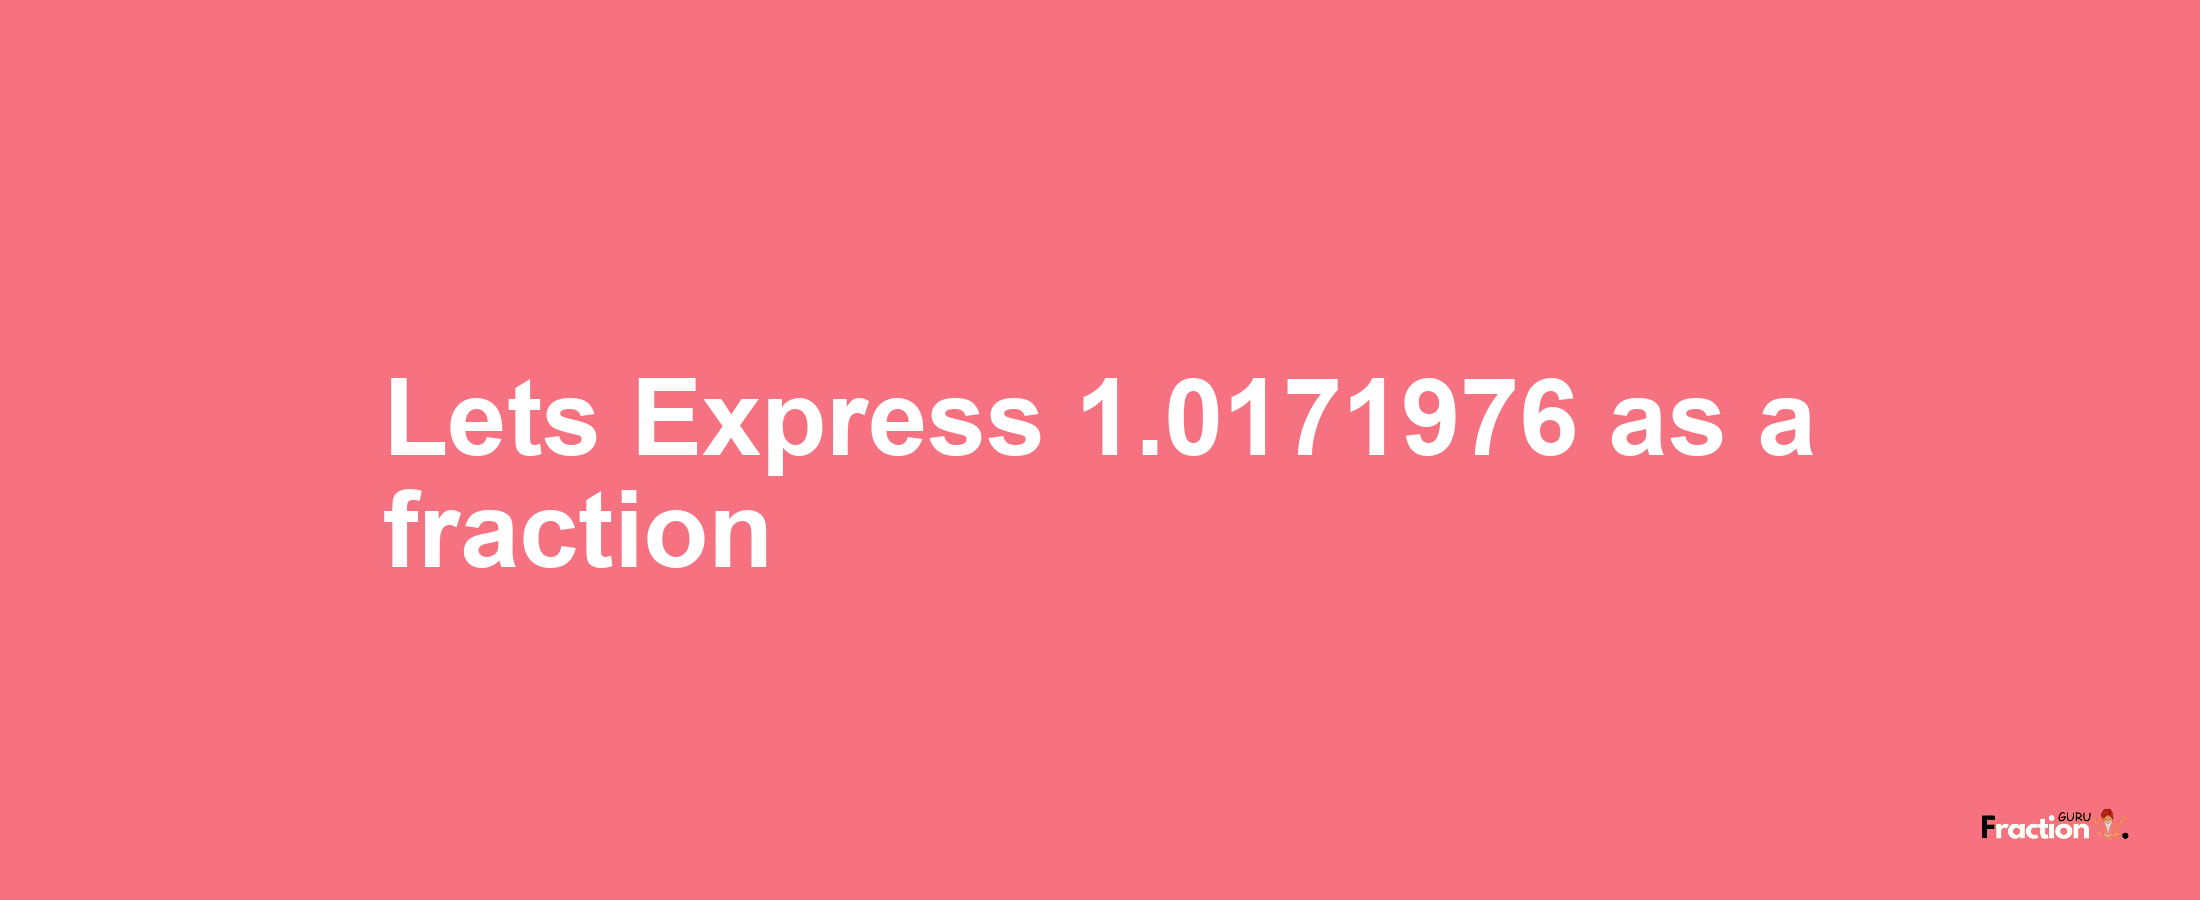 Lets Express 1.0171976 as afraction